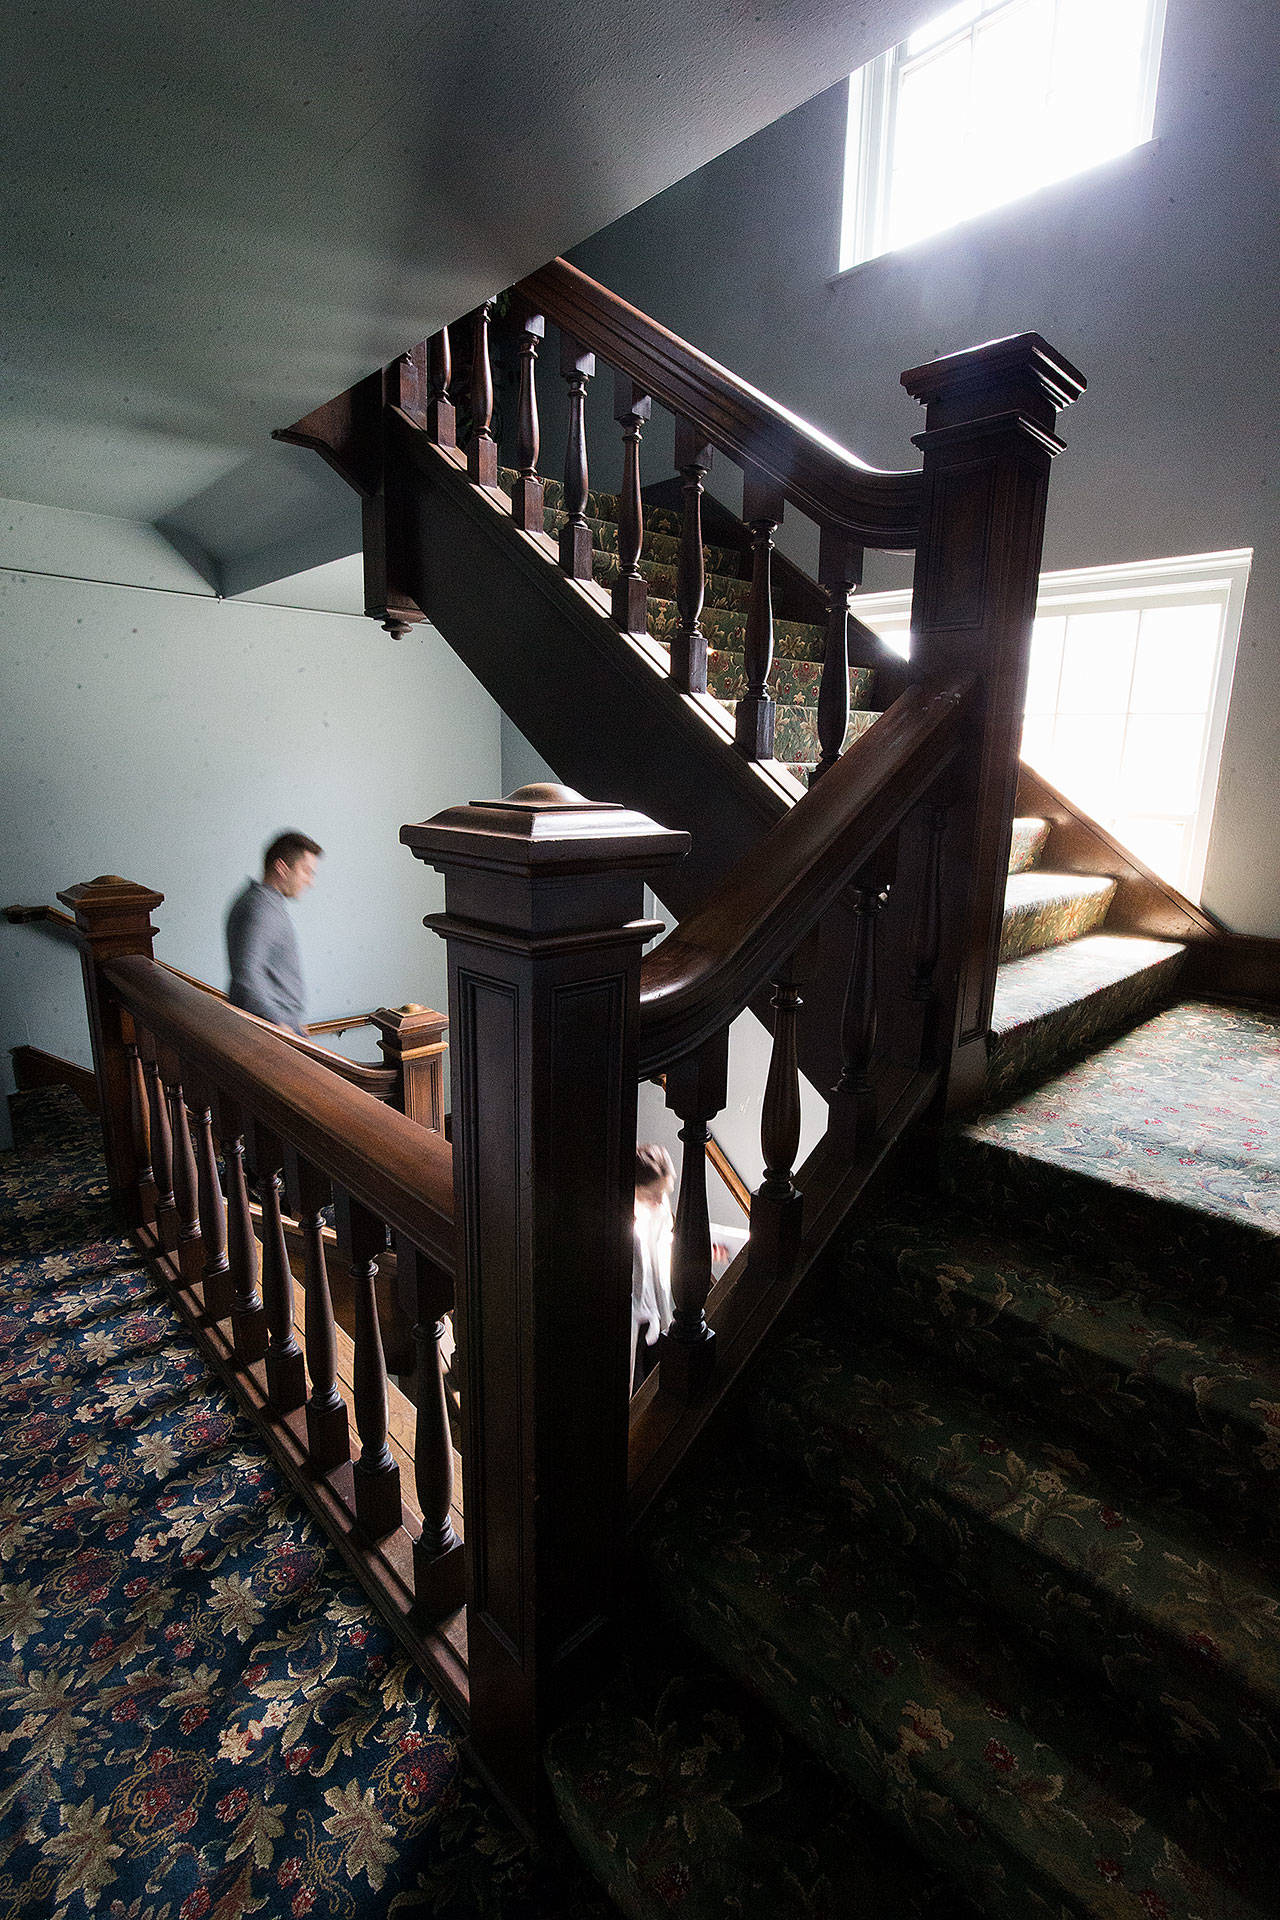 Ornate stairs take visitors up and down floors in the former Club Broadway on May 1. (Andy Bronson / The Herald)